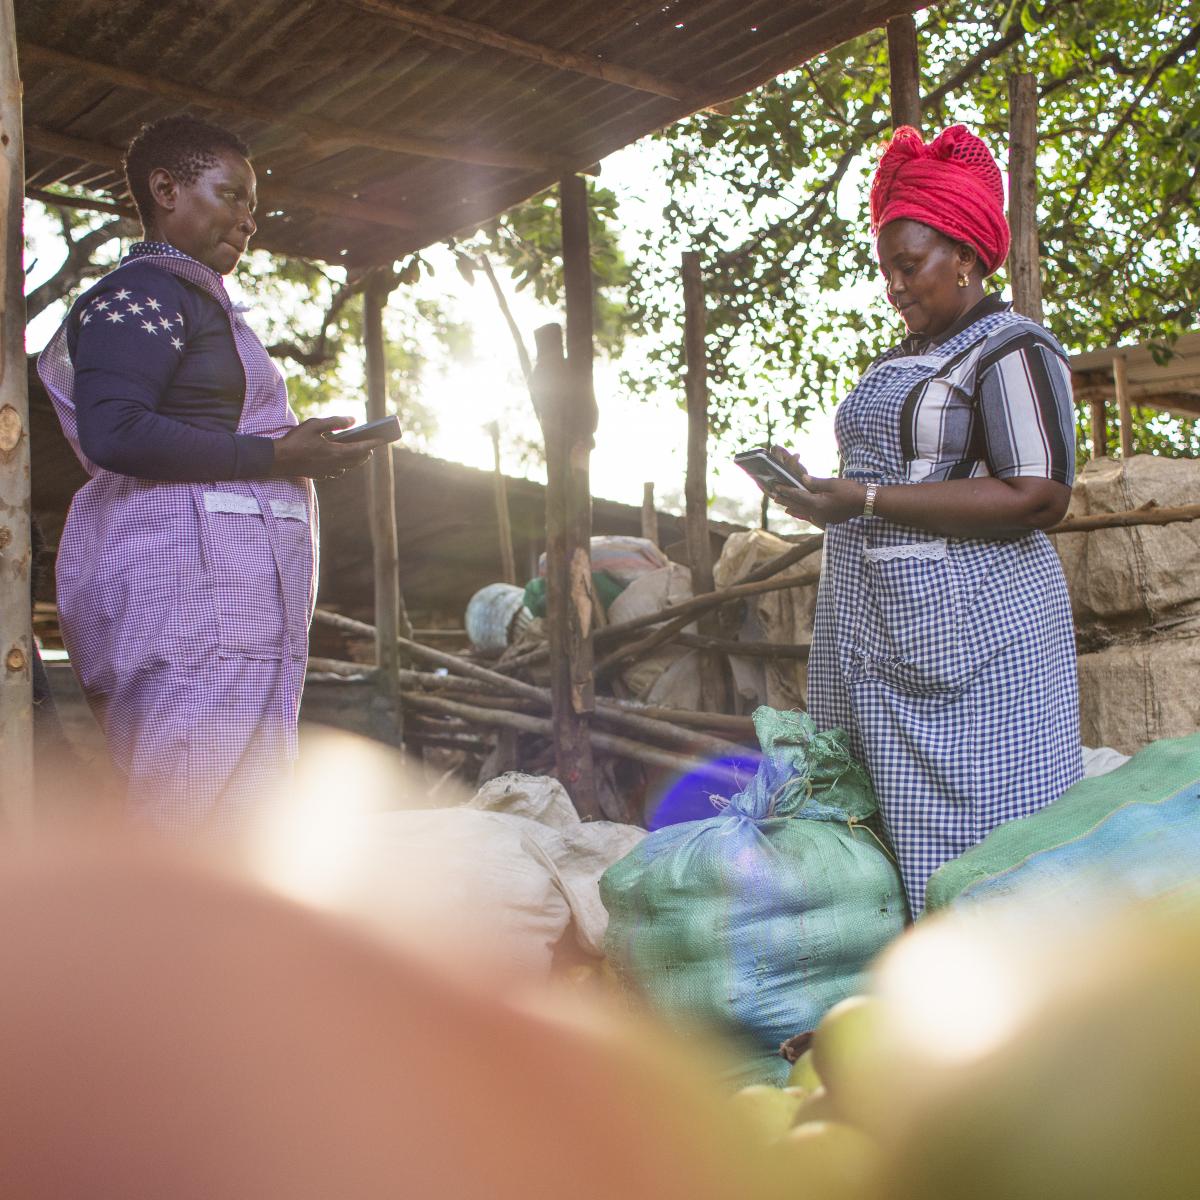 Two women standing conduct a transaction for a large produce purchase using the smartphones that each is holding.